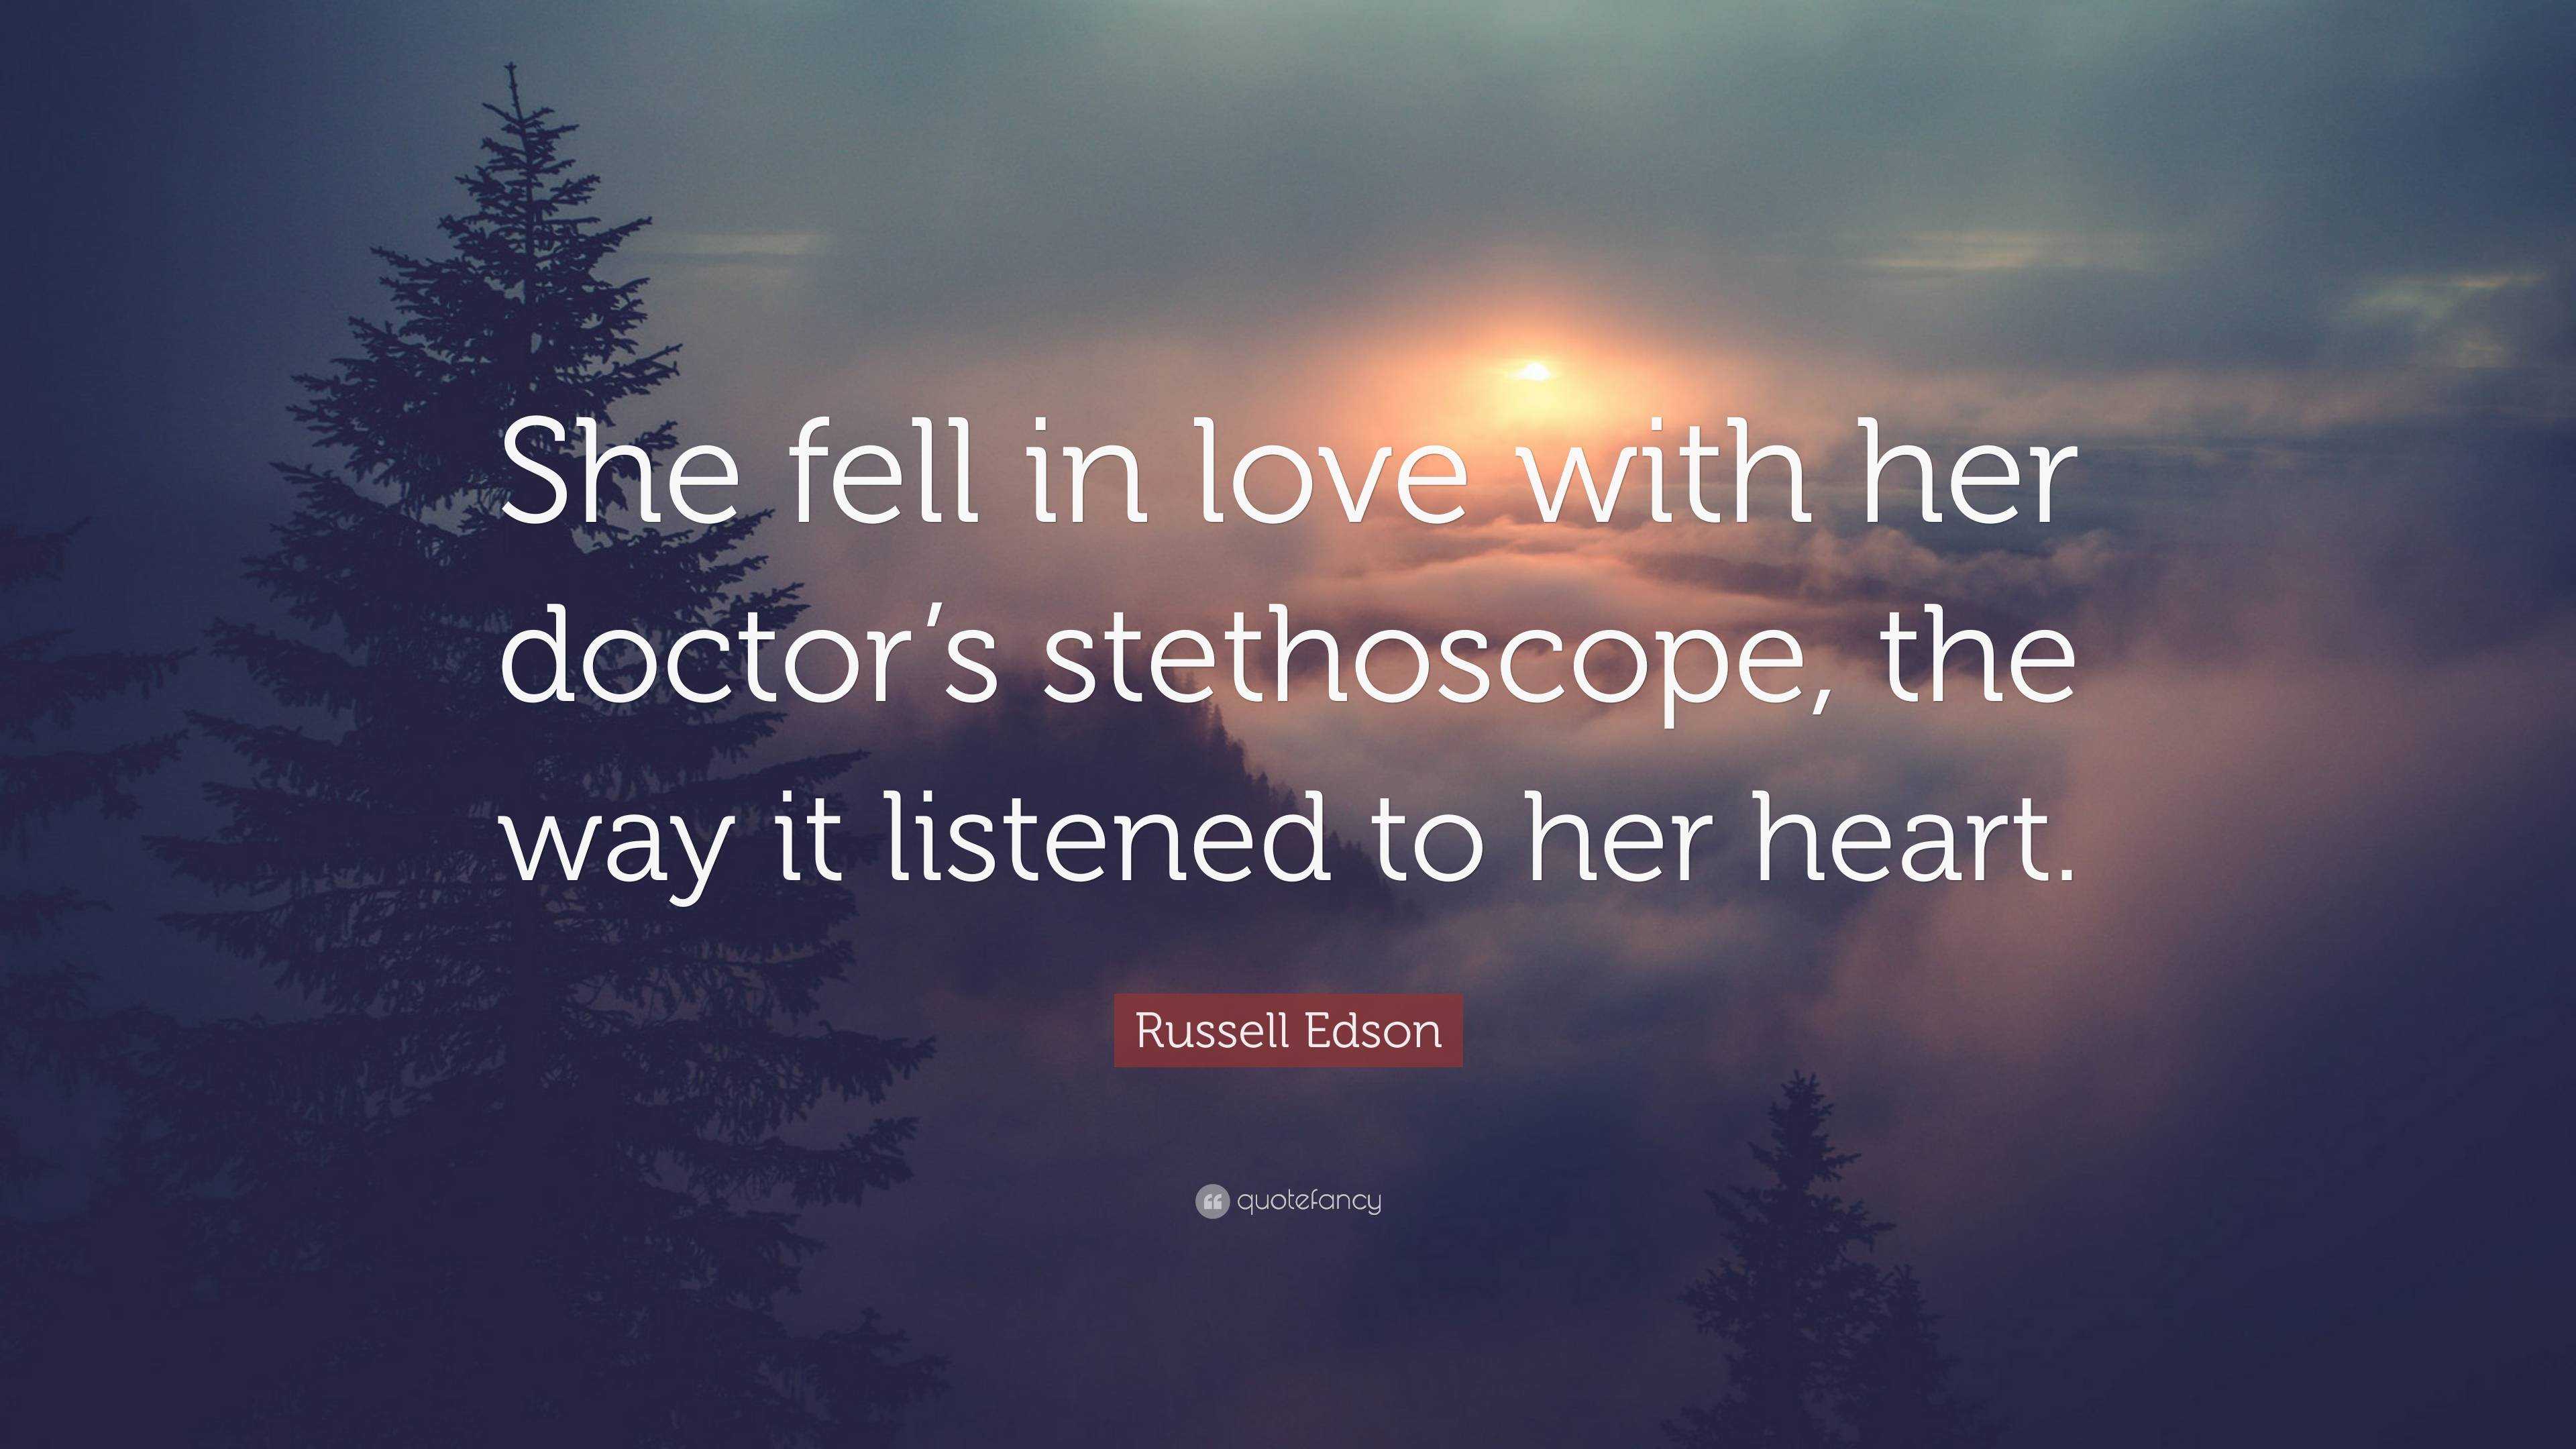 Russell Edson Quote: “She fell in love with her doctor's stethoscope, the  way it listened to